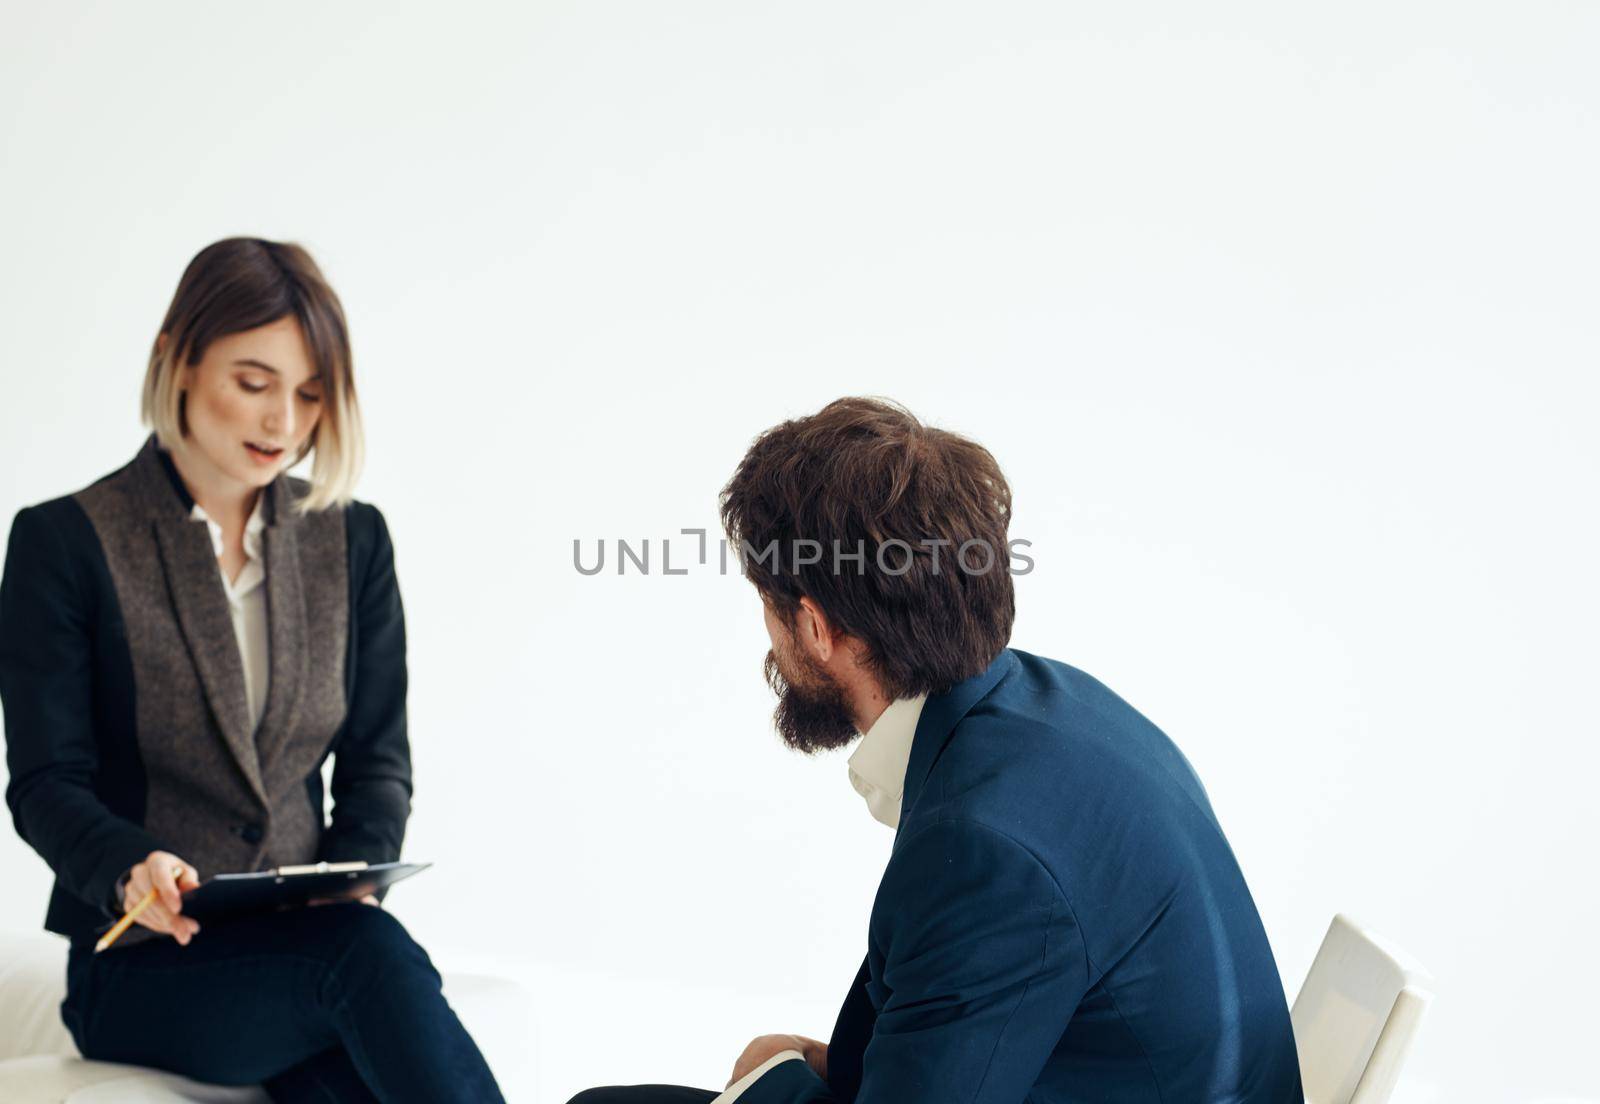 A man in a blue jacket sits opposite a woman in a suit on a light background indoors by SHOTPRIME